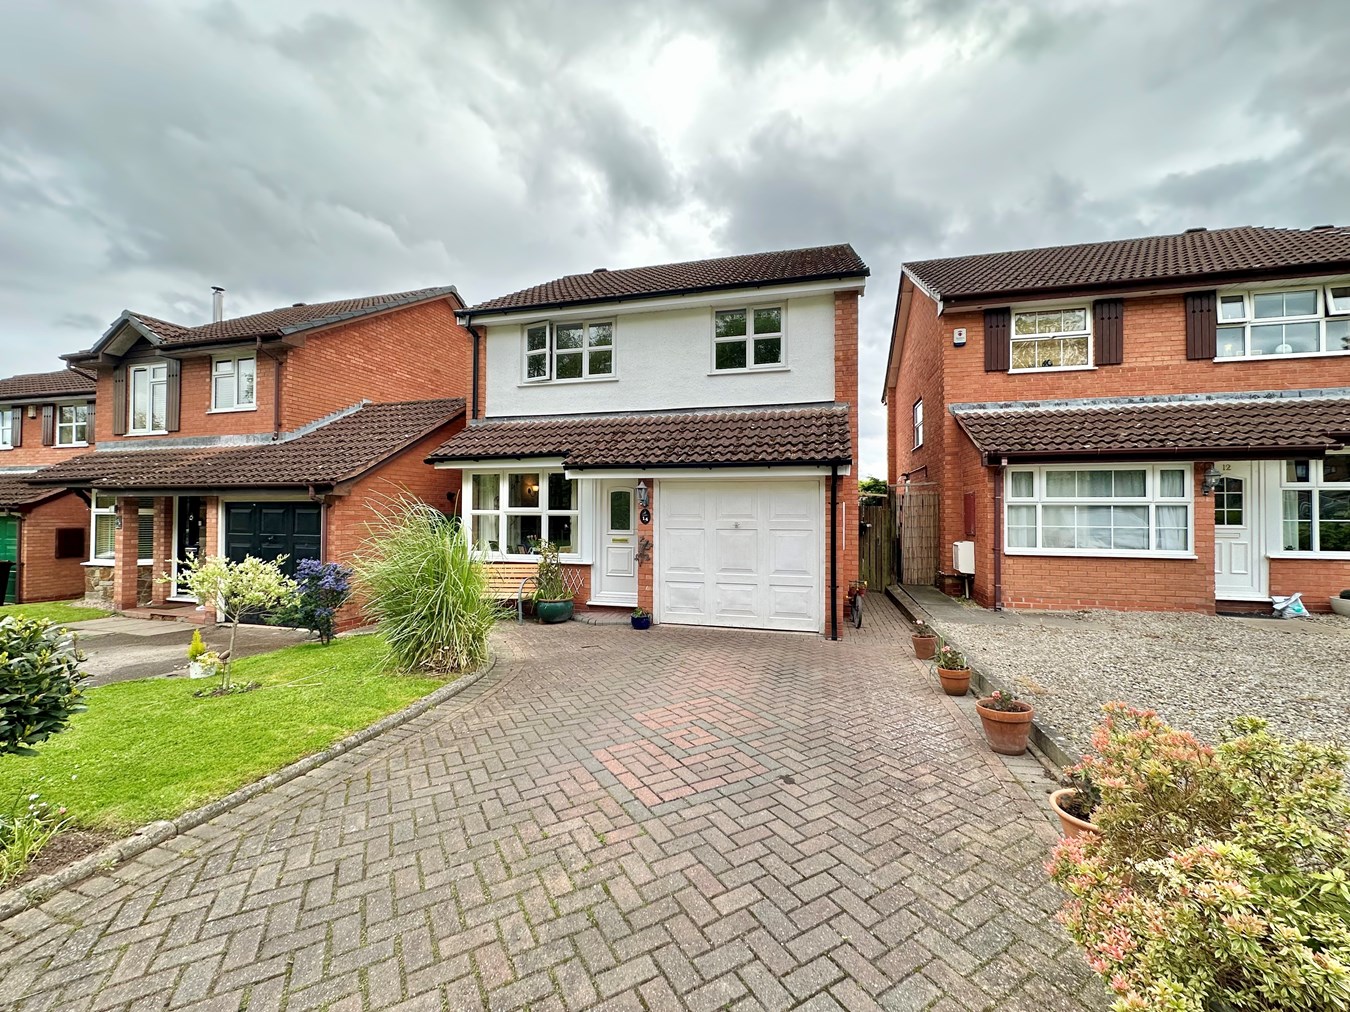 Queenswood Drive, Queenswood Dr, HR1, Hereford, HR1